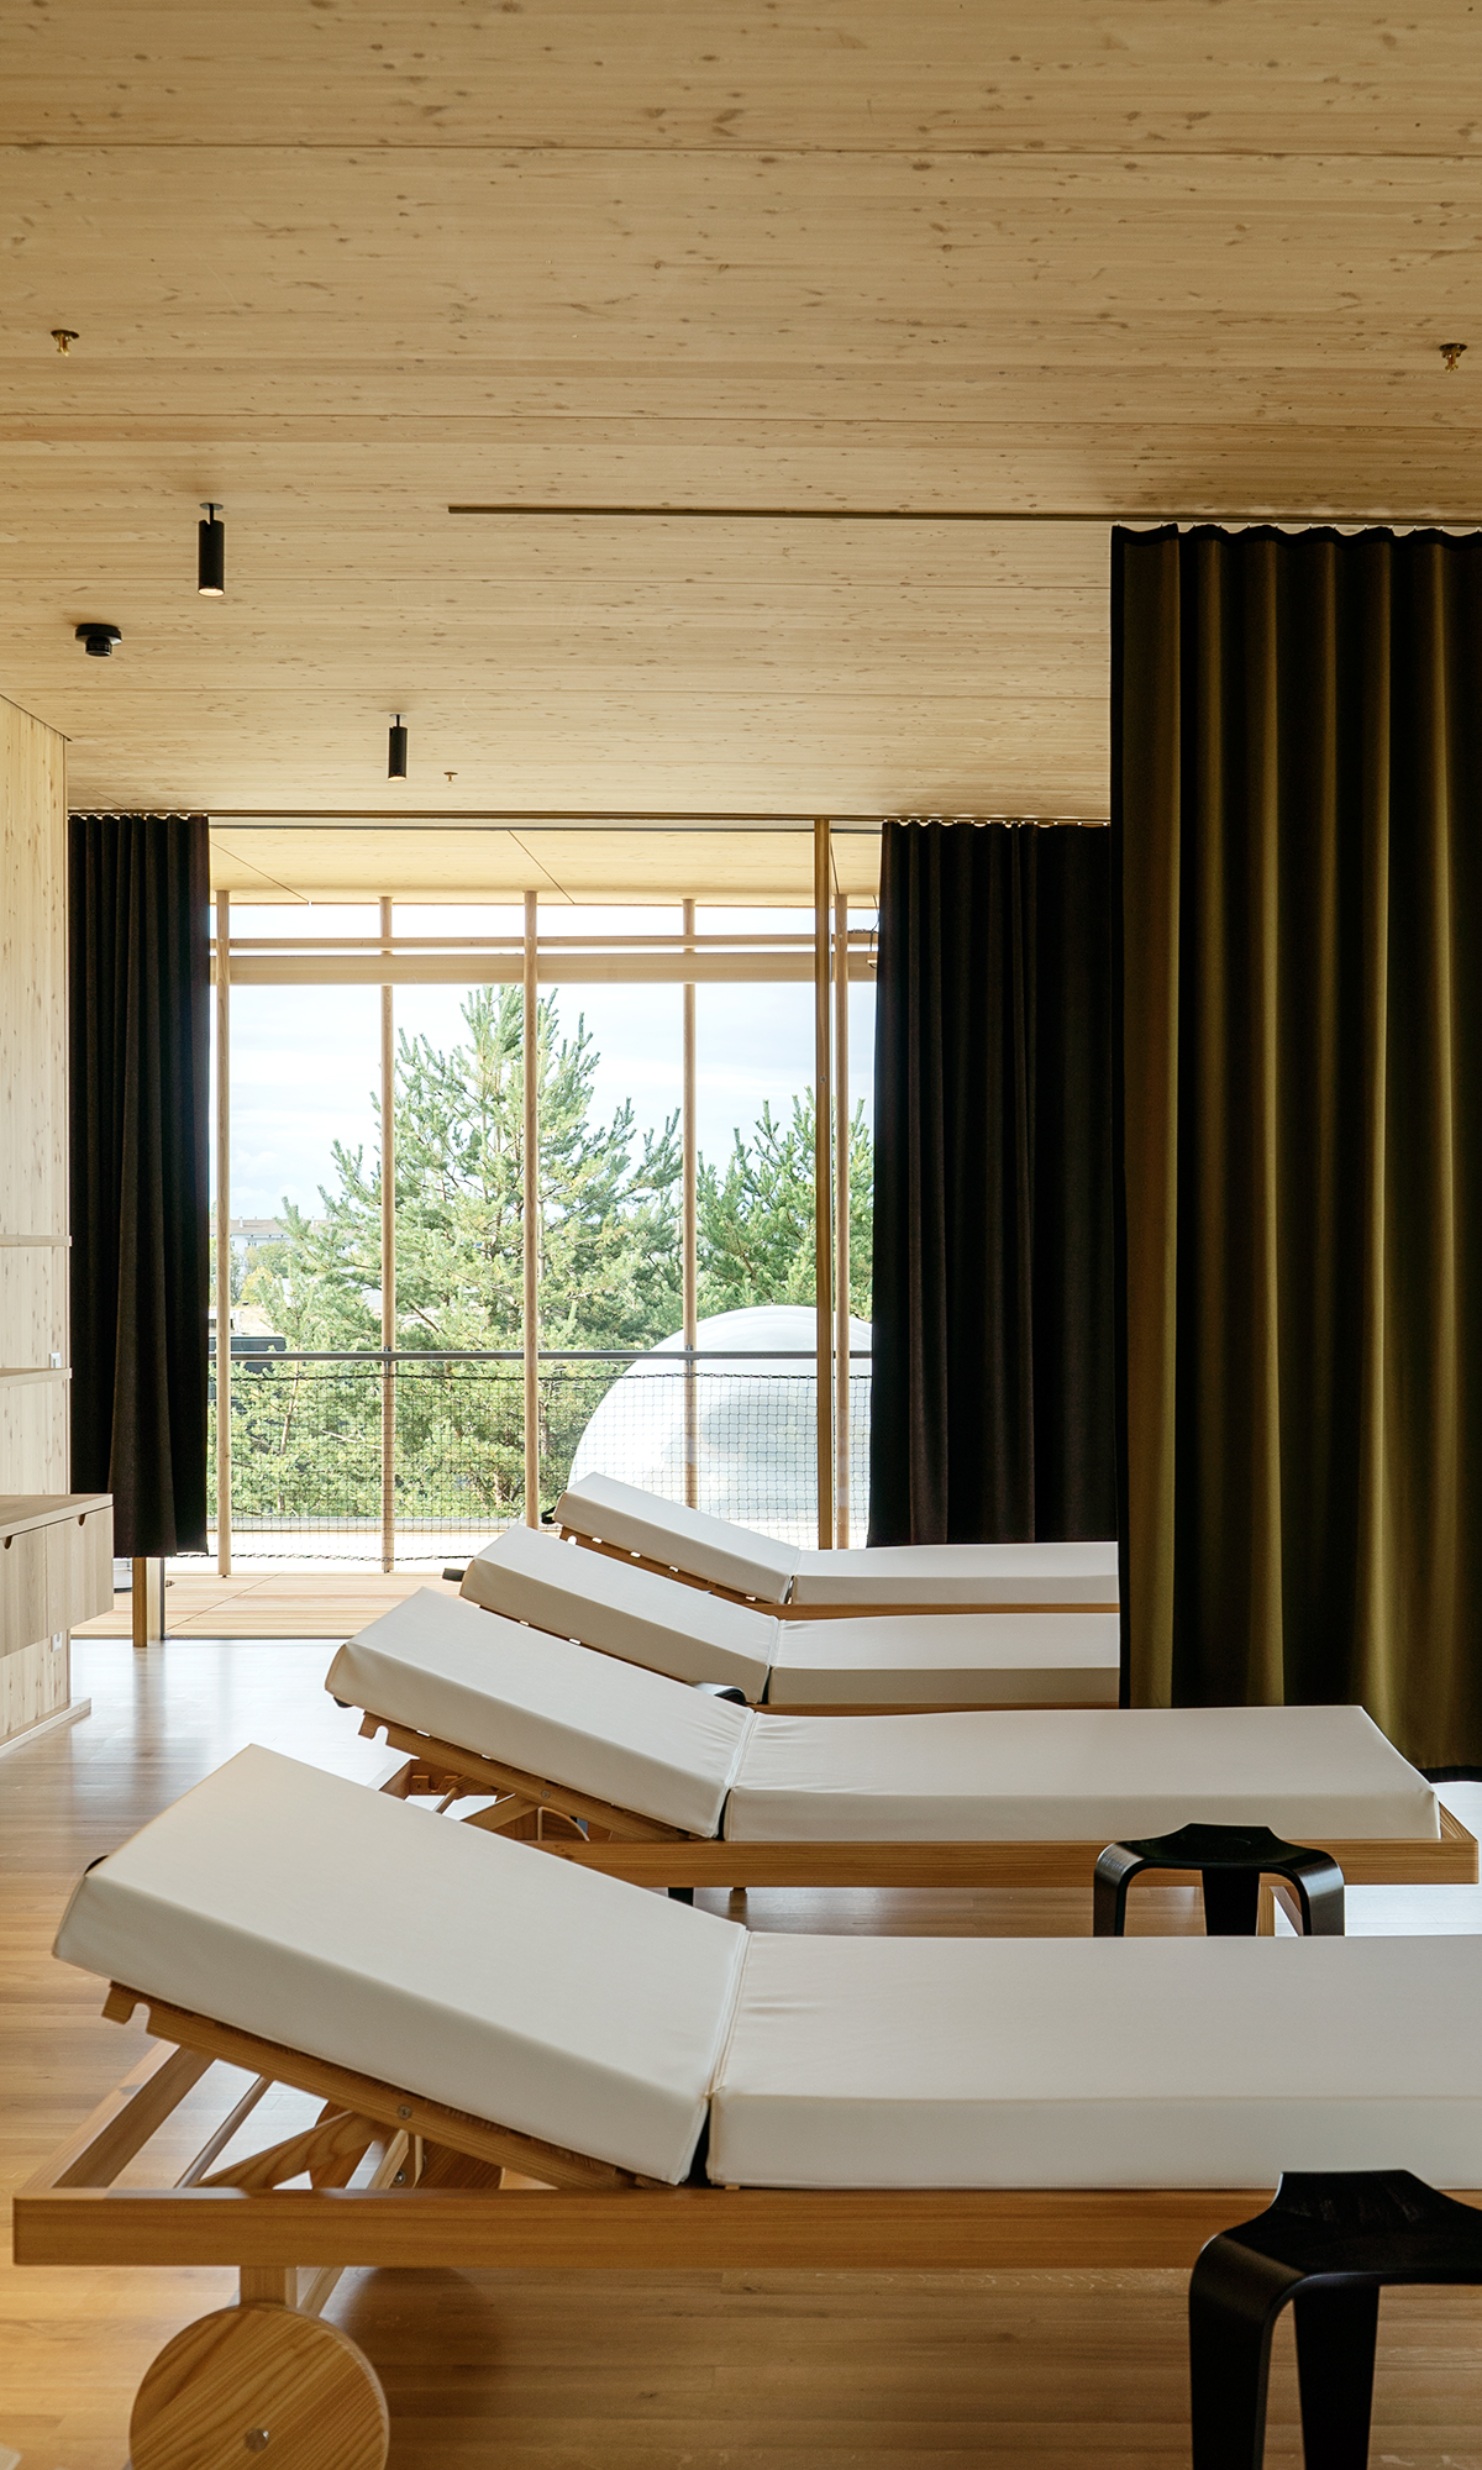 Looking into the bright relaxation room, with four loungers and dark curtains to break up the space